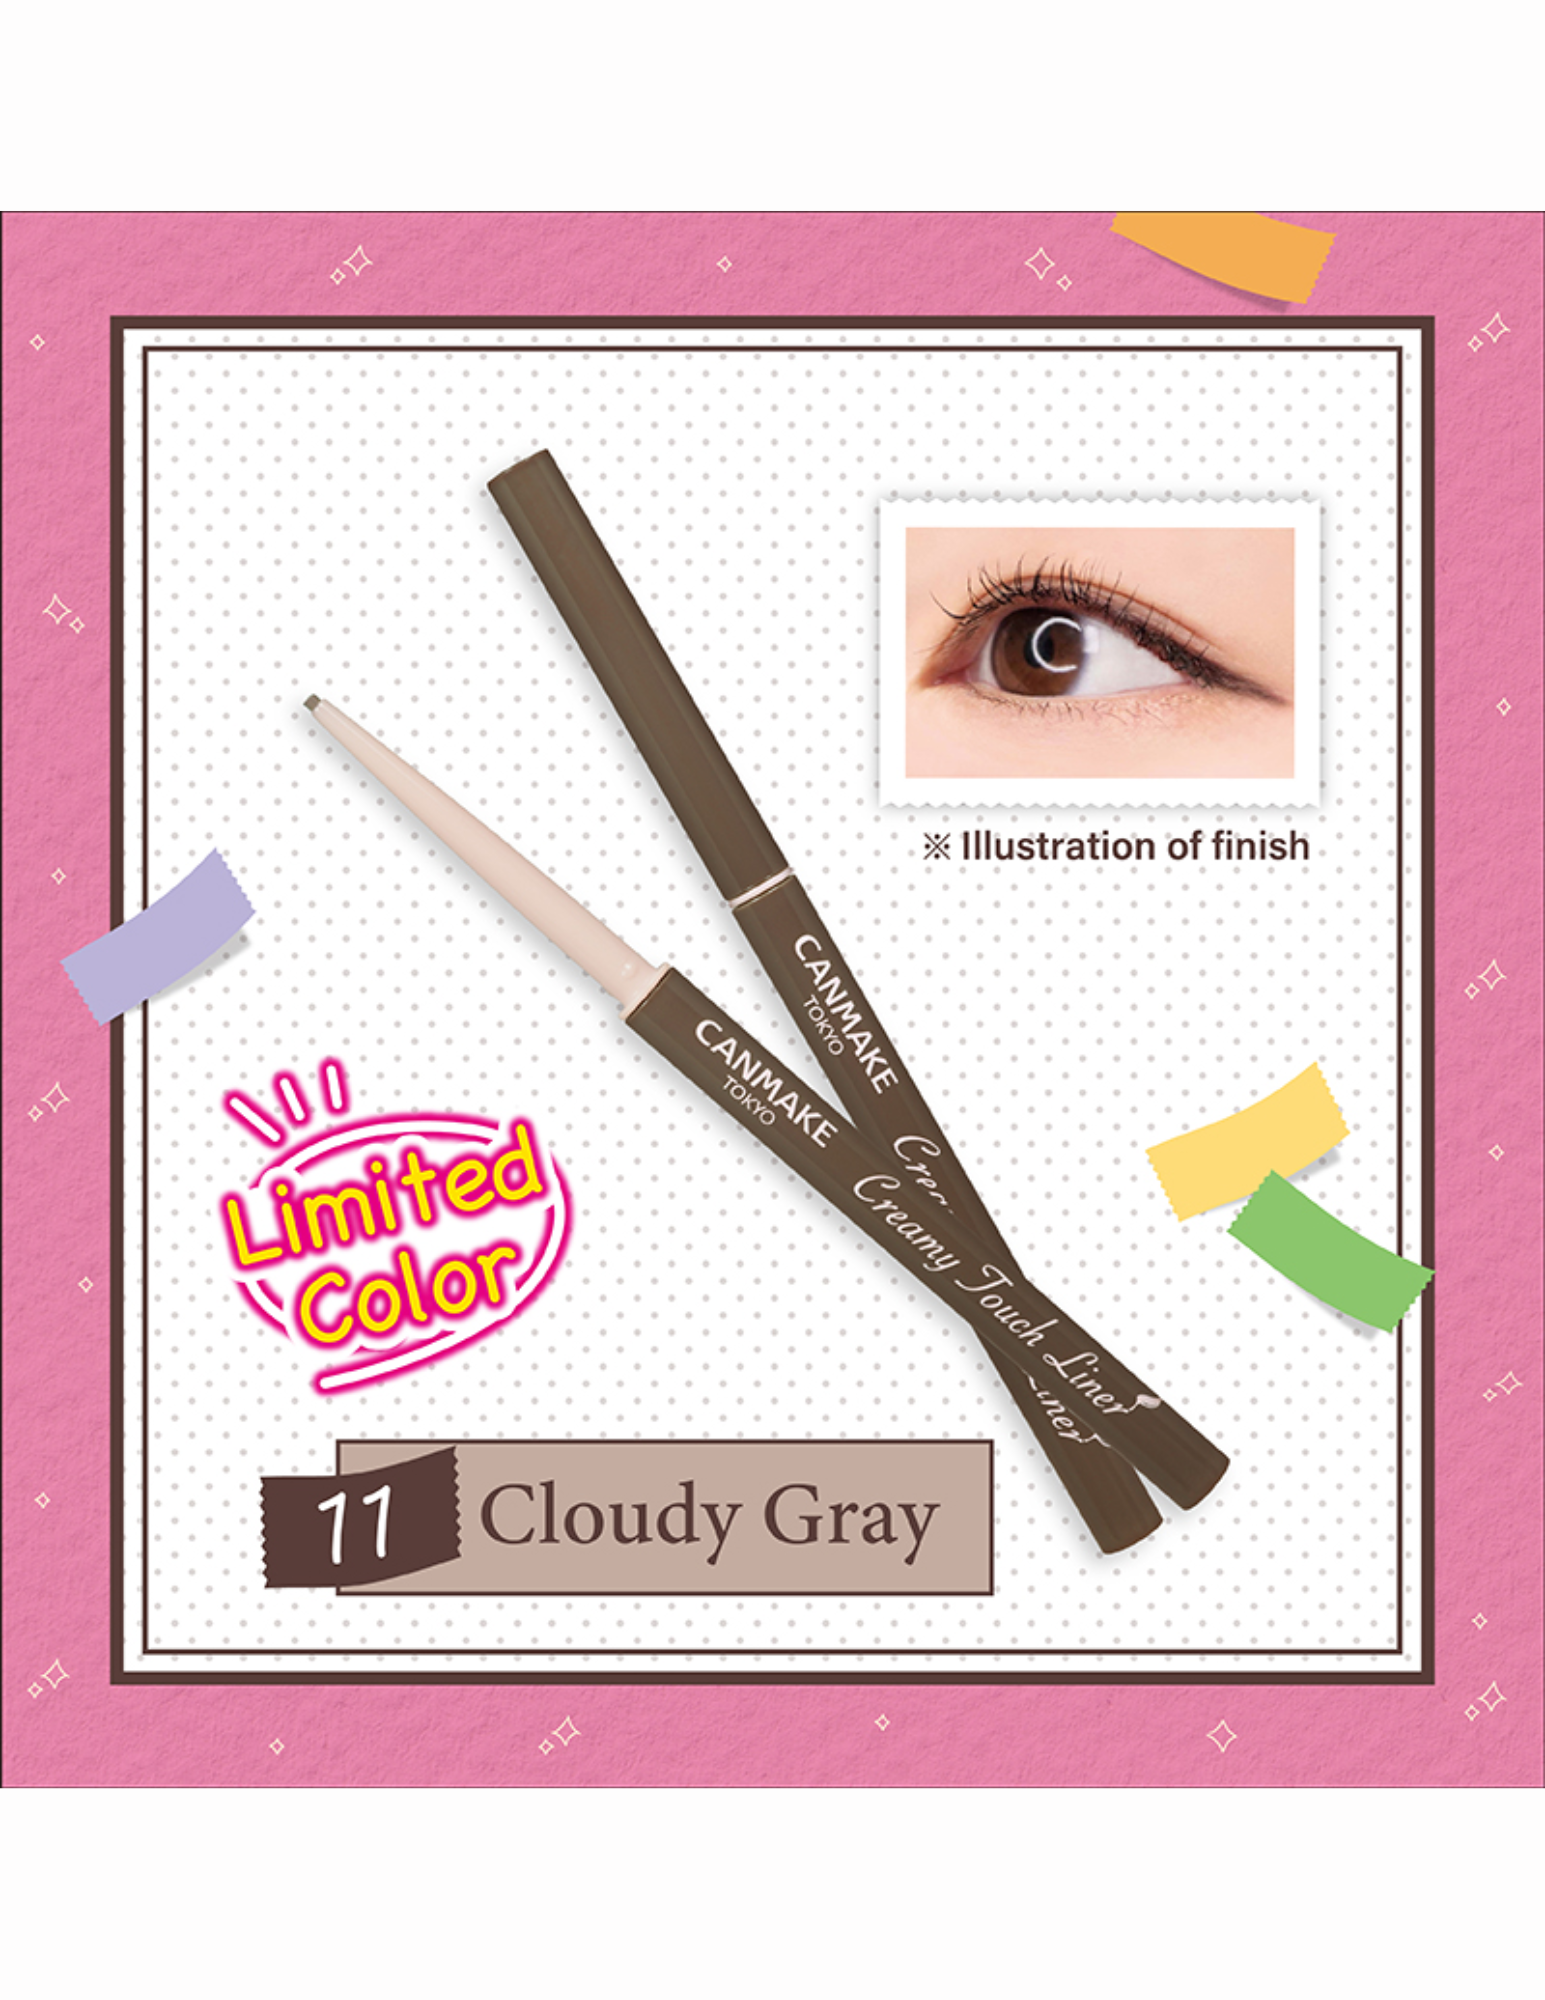 Canmake Creamy Touch Liner Cloudy Gray - Unique Bunny